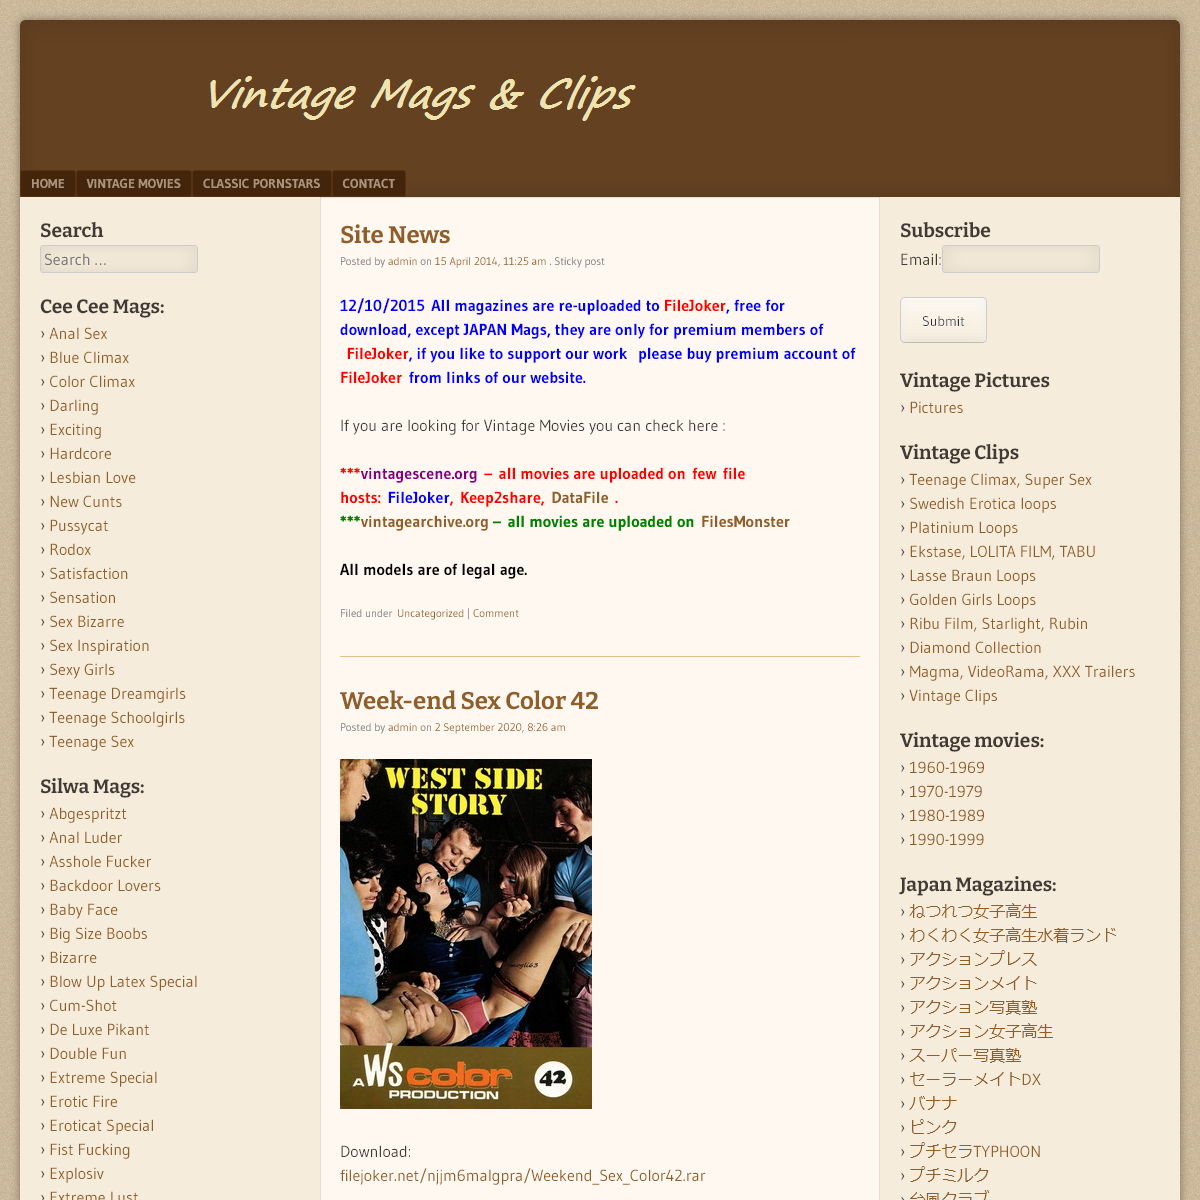 A complete backup of www.www.vintagemags.org